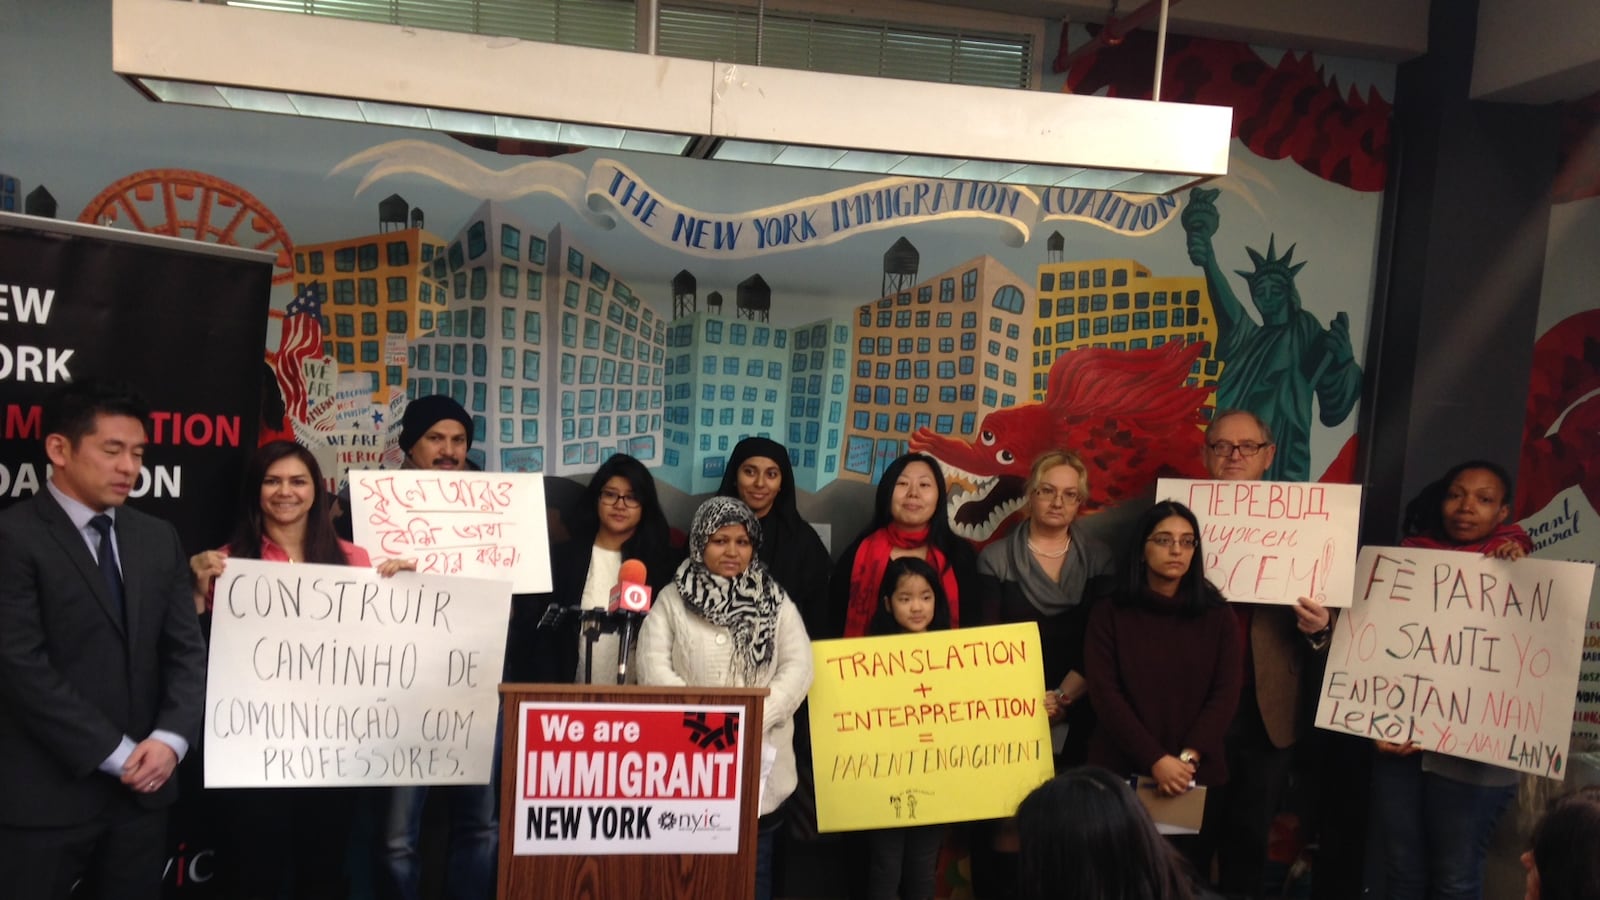 Parents and immigration advocates gather at the headquarters of New York Immigration Coalition to ask the Department of Education to improve access for parents with limited English proficiency.